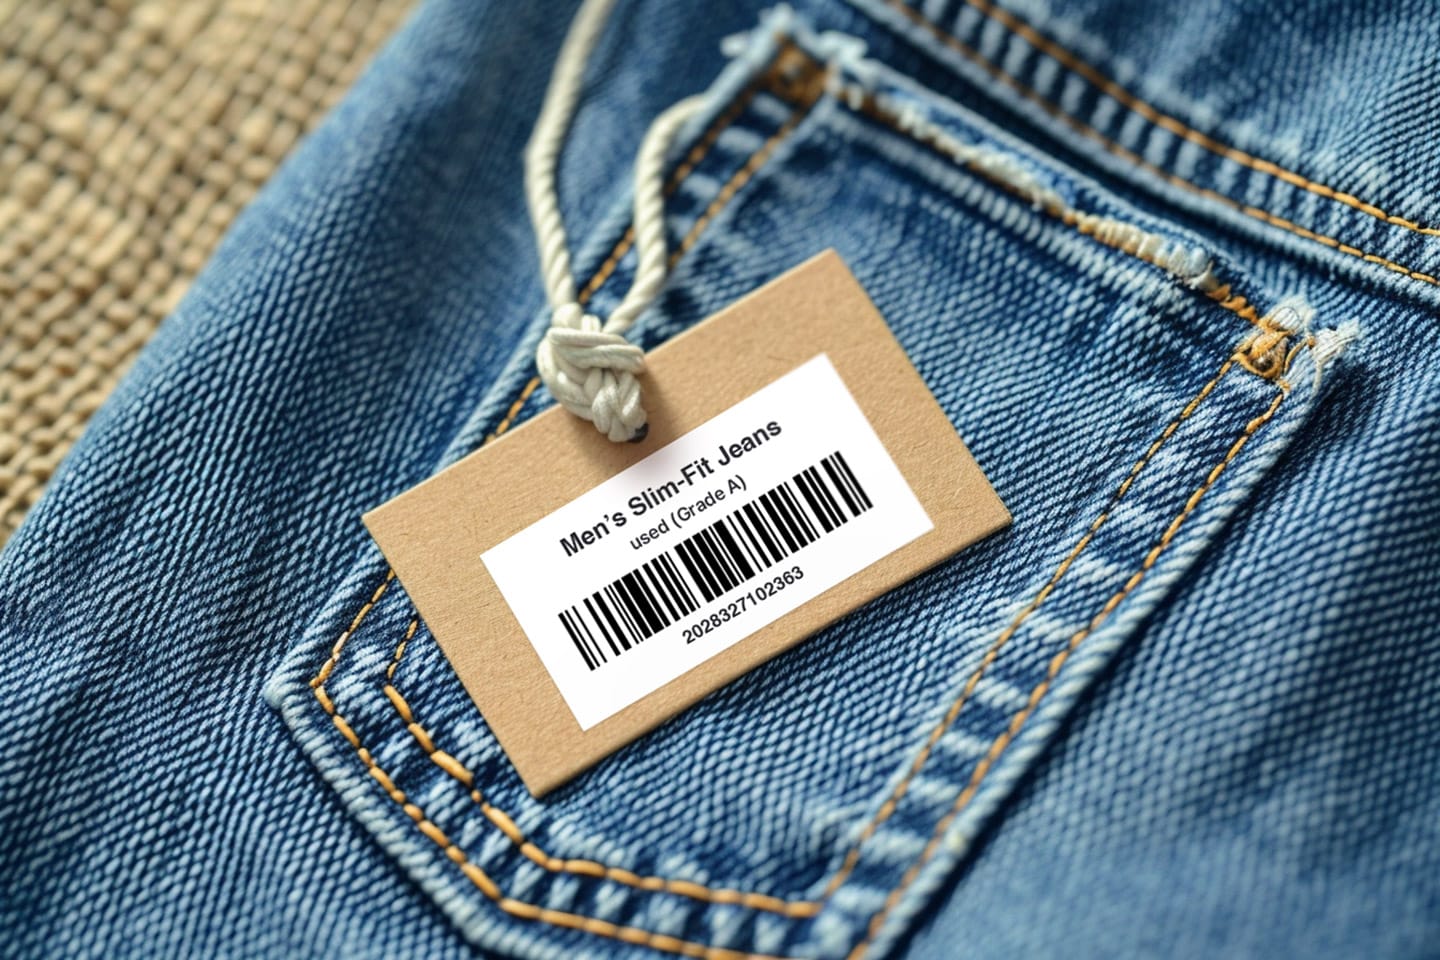 Barcode labels with used product grades.